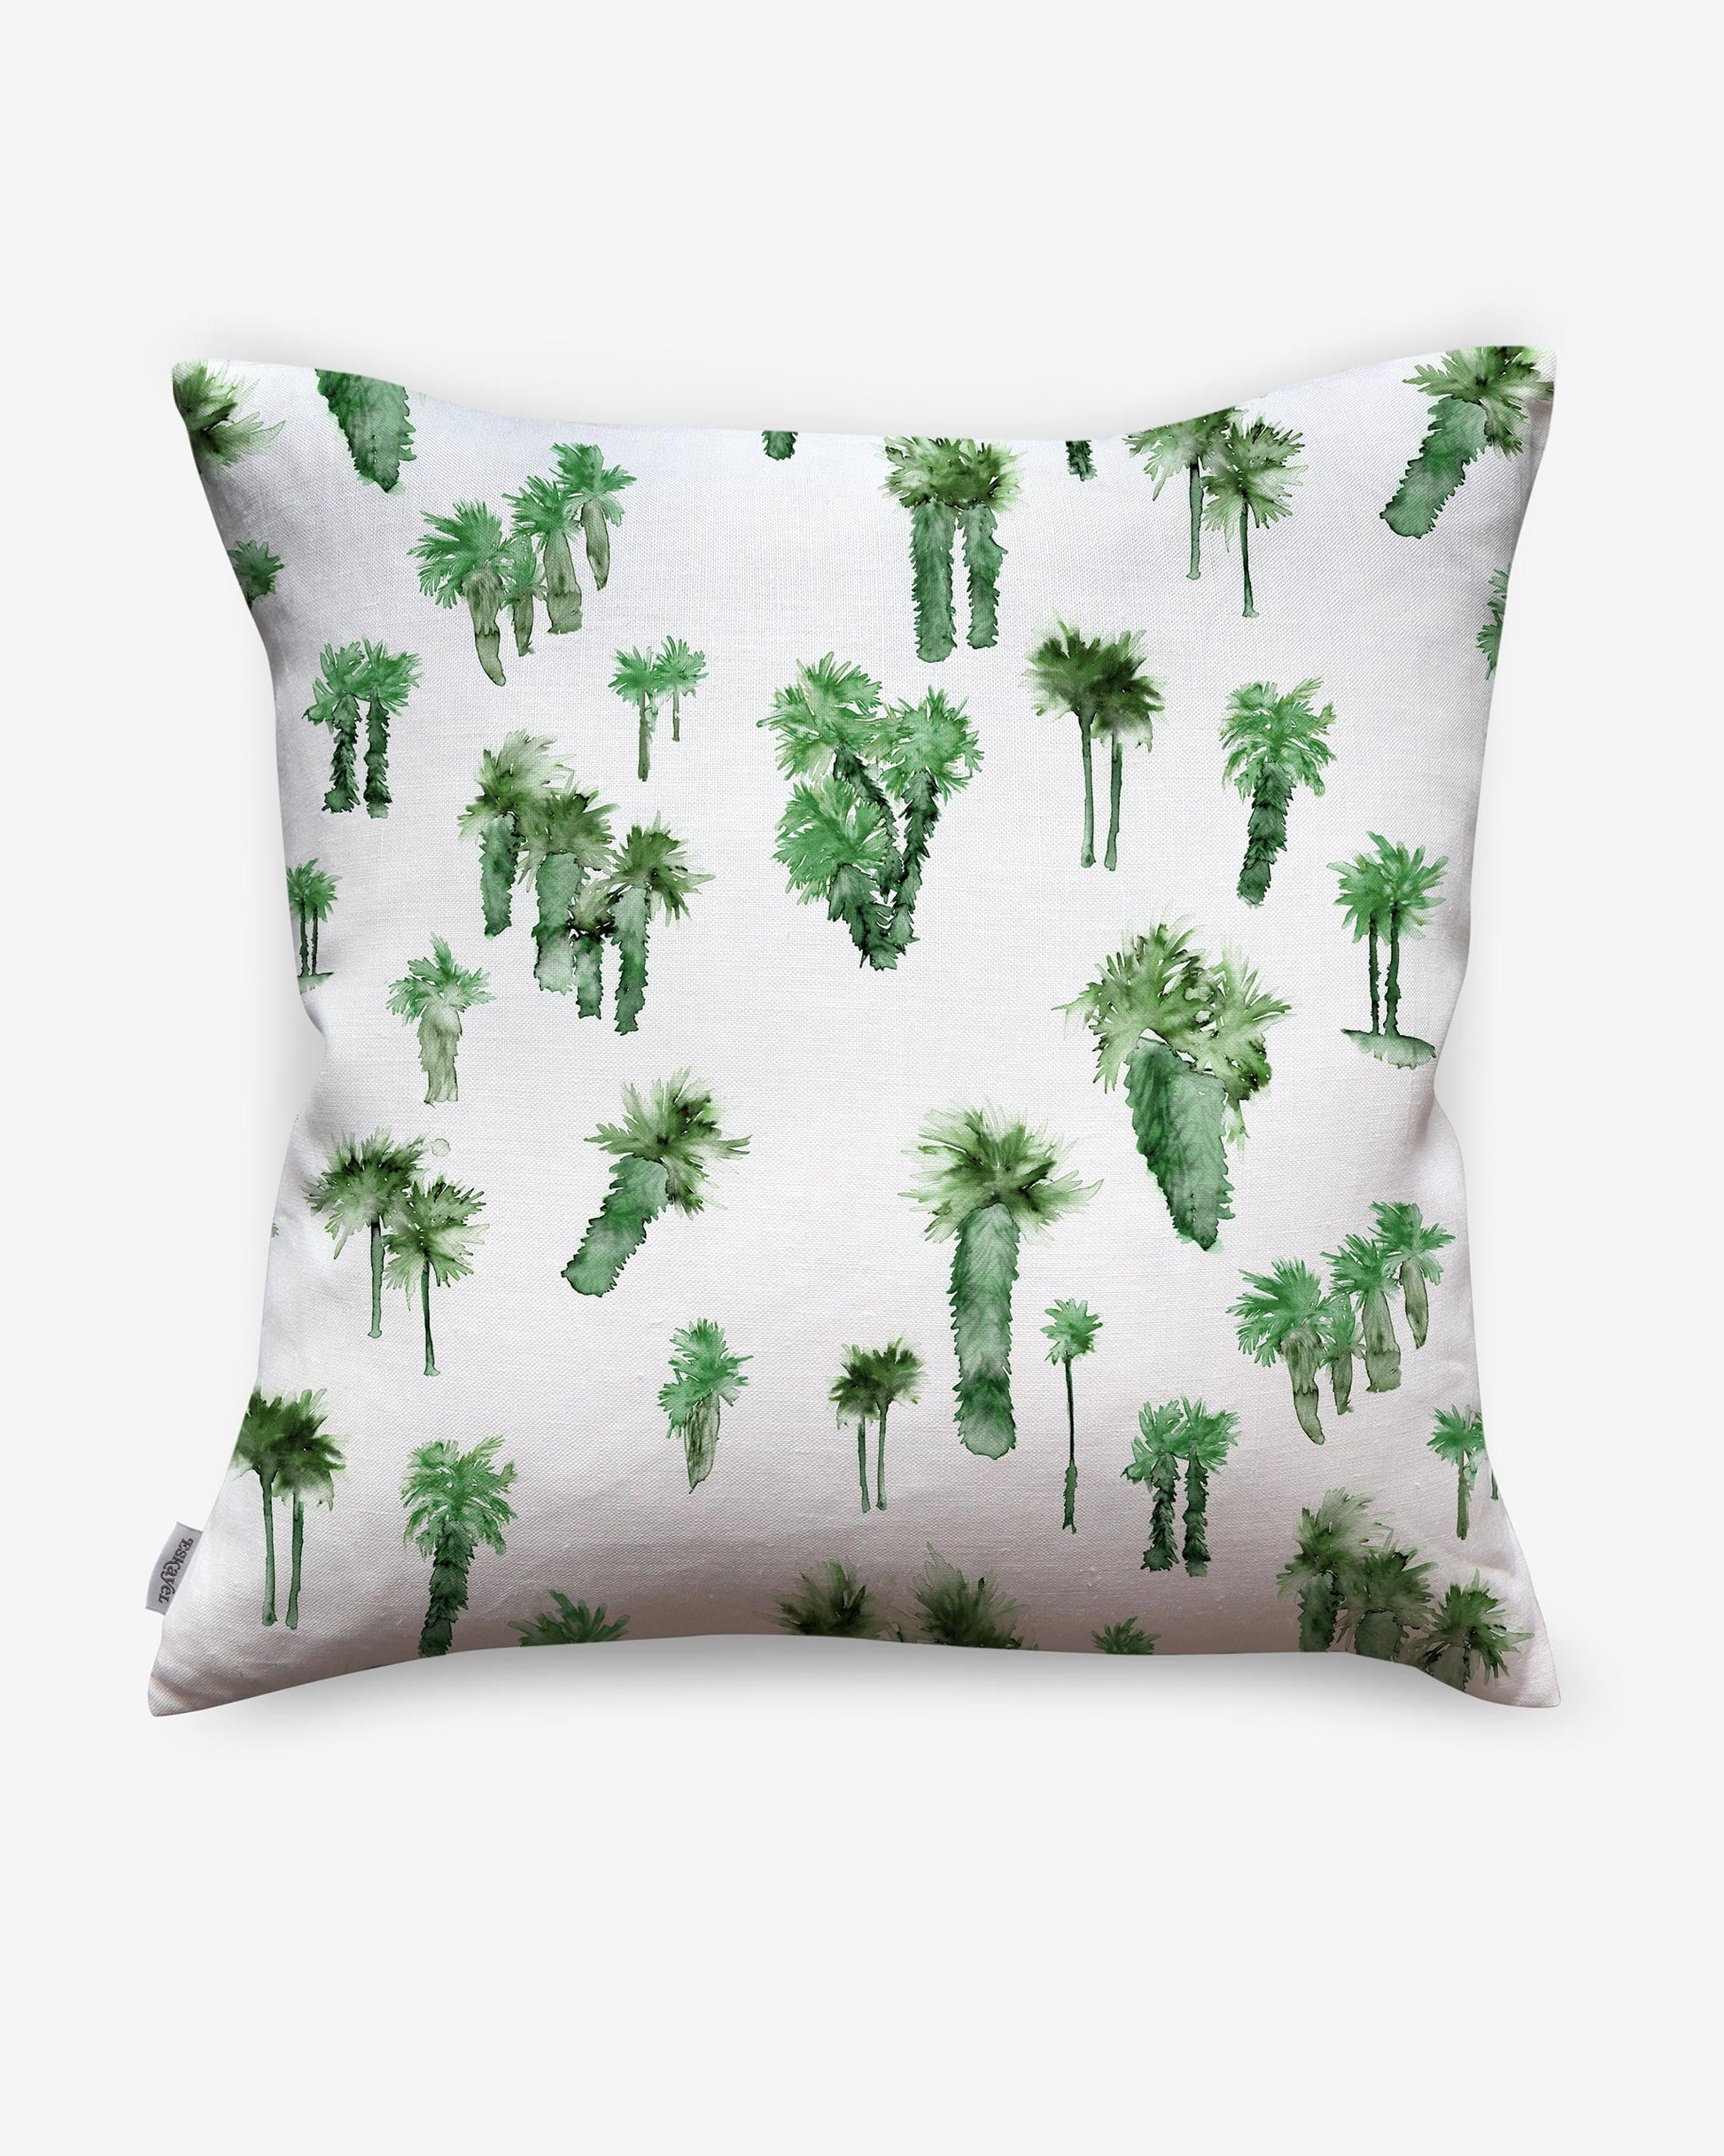 A Perfect Palm Pillow featuring a watercolor-style palm tree design